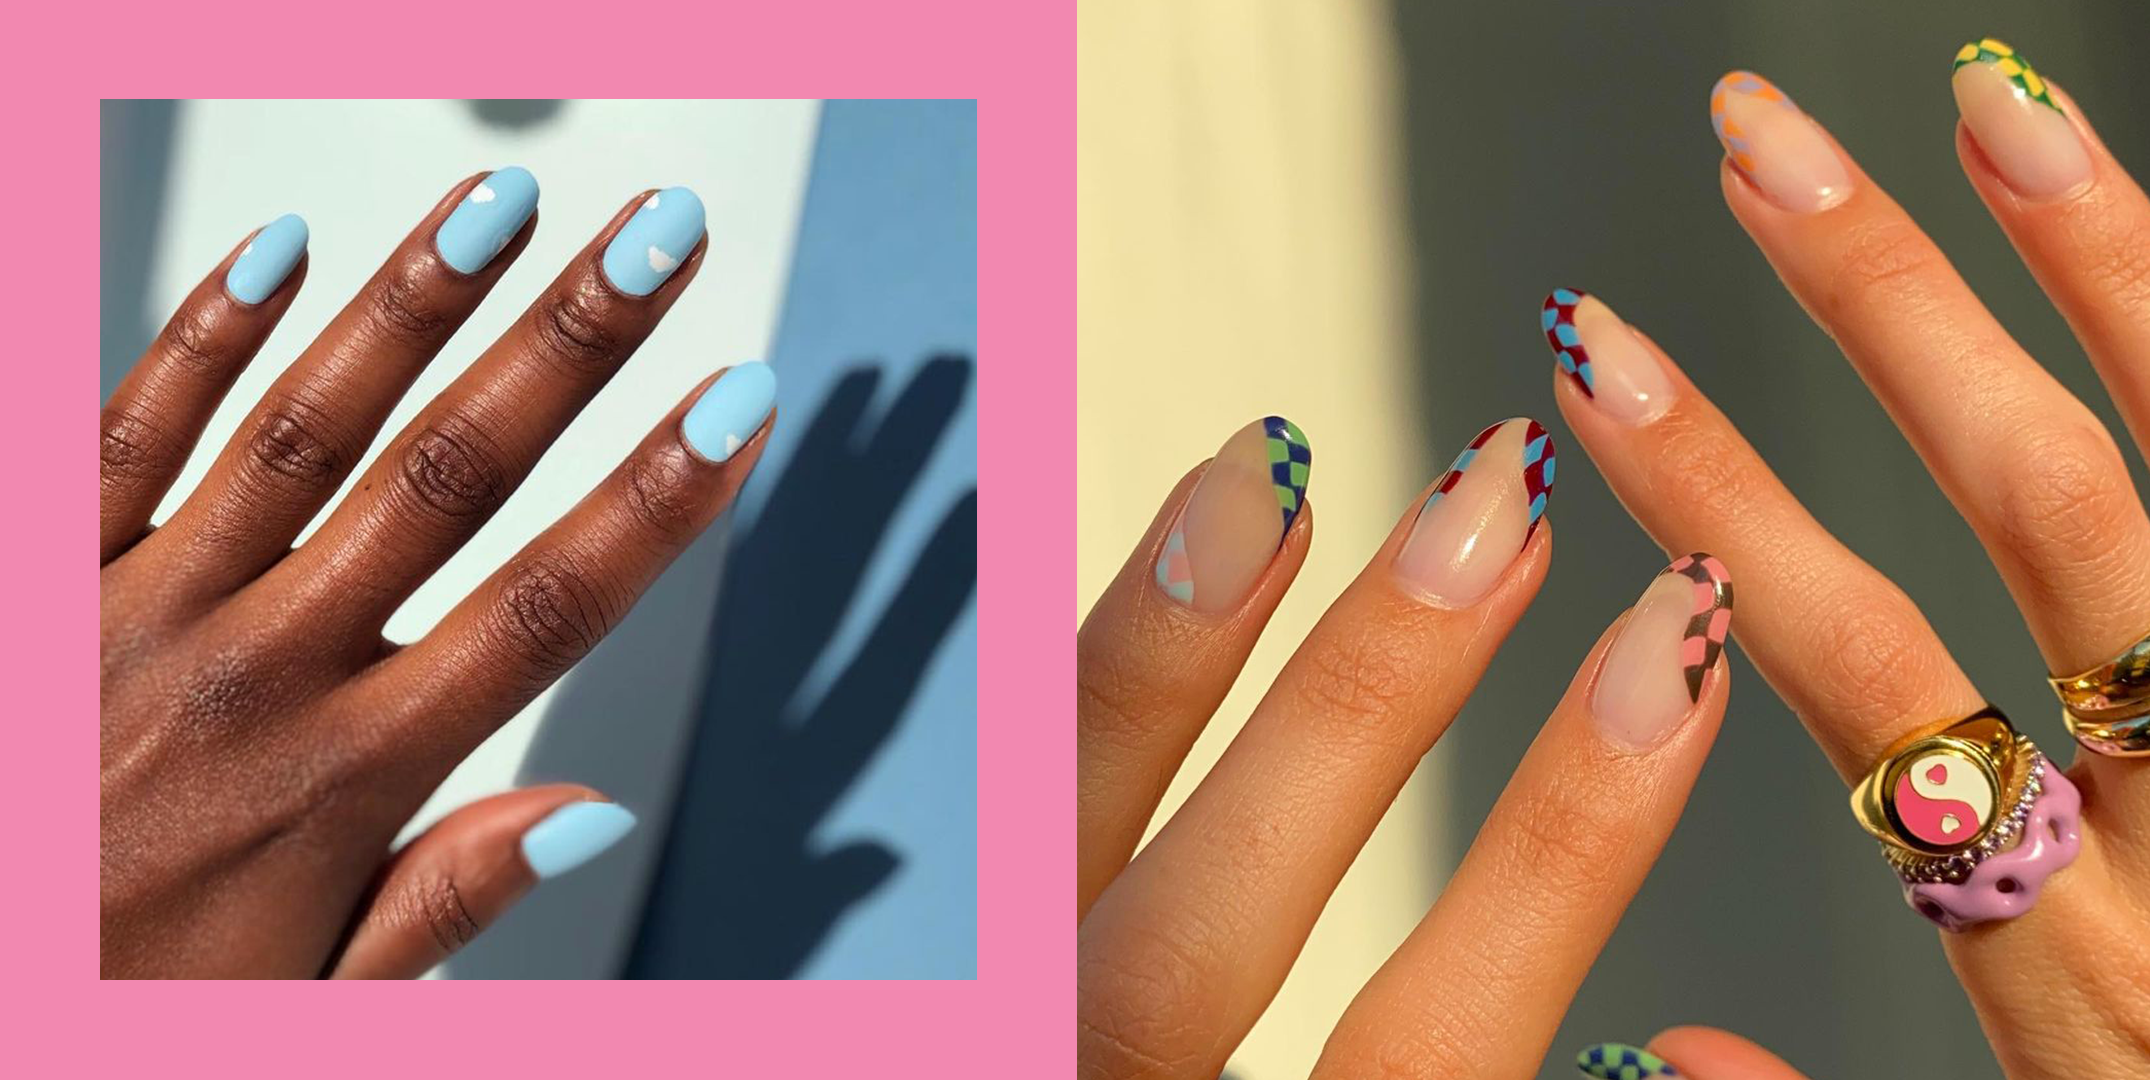 4. "Spring Nail Trends for Black Women" - wide 10